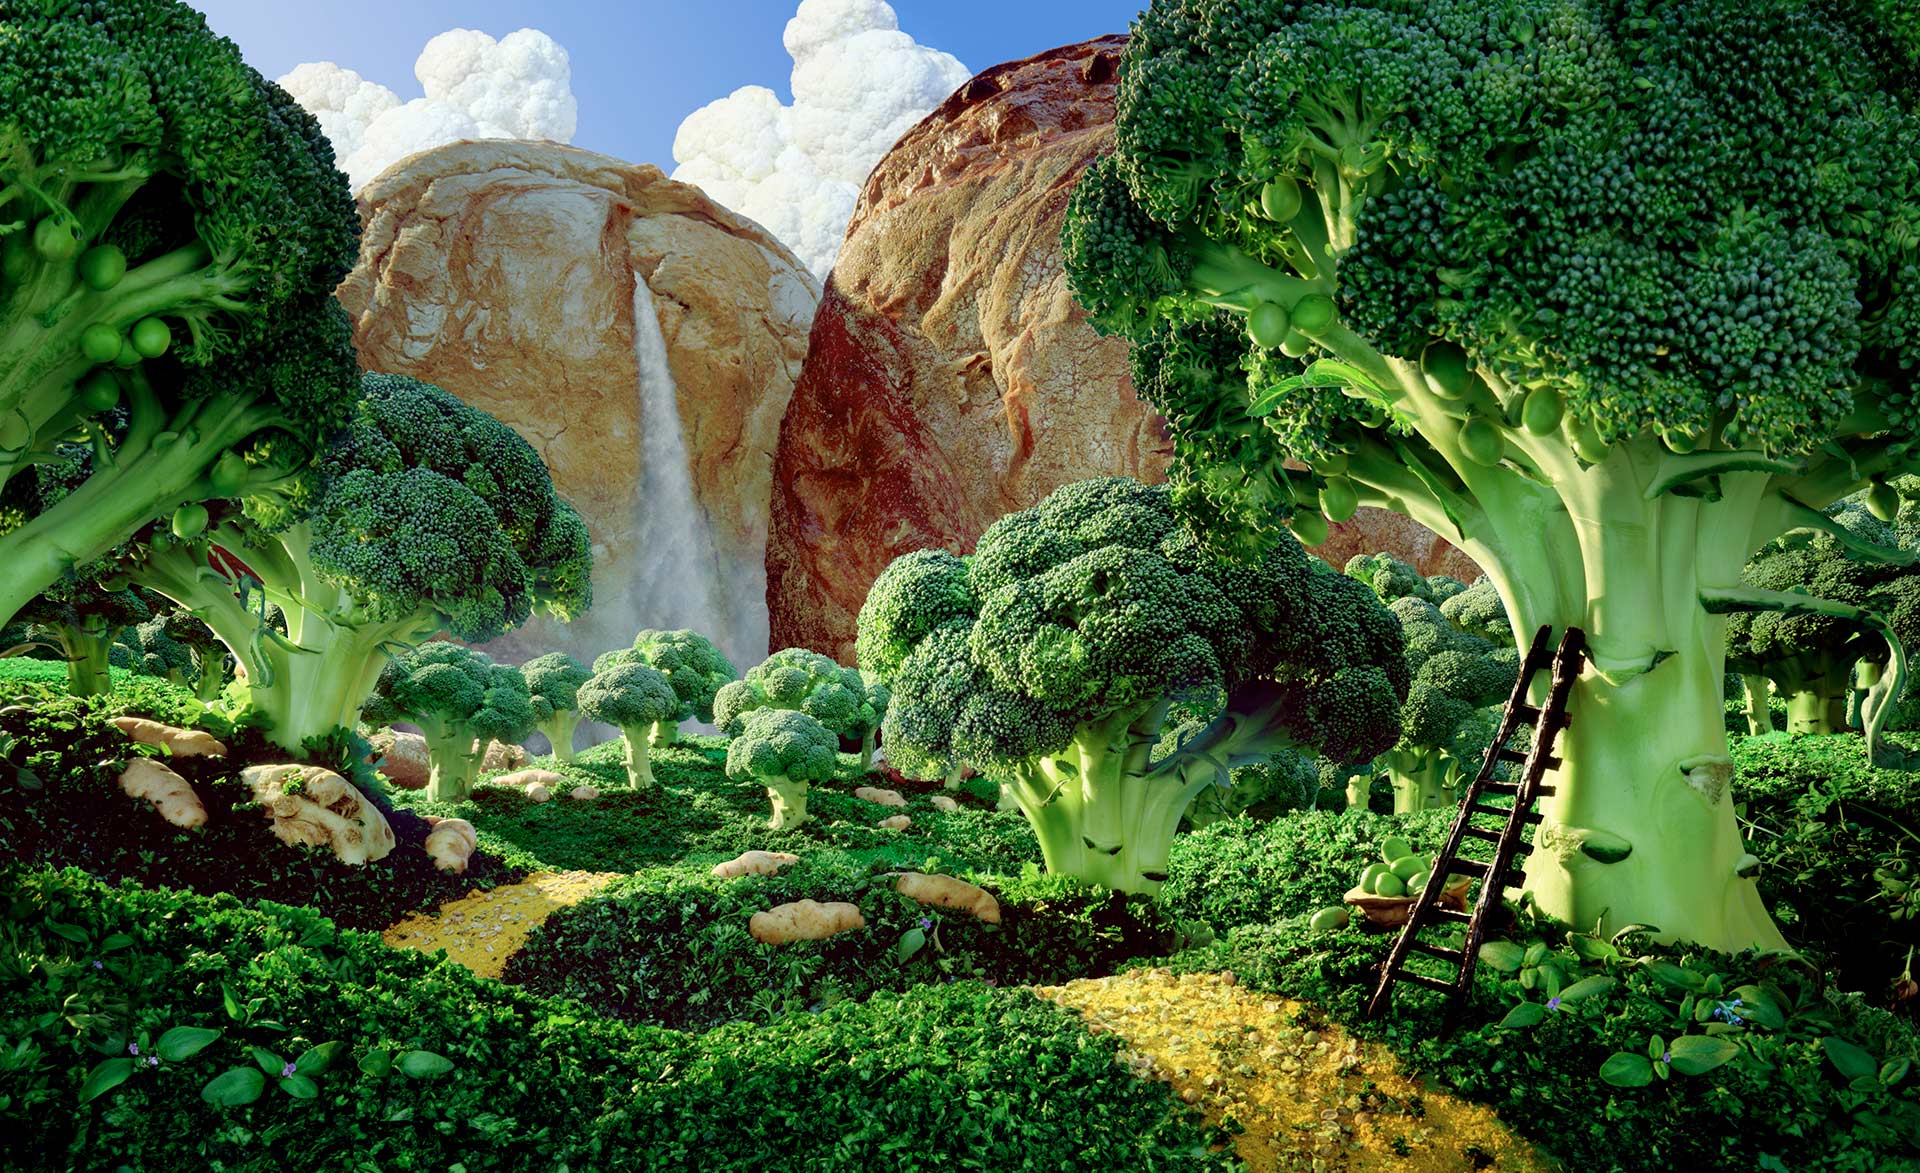 "Broccoli Forest"